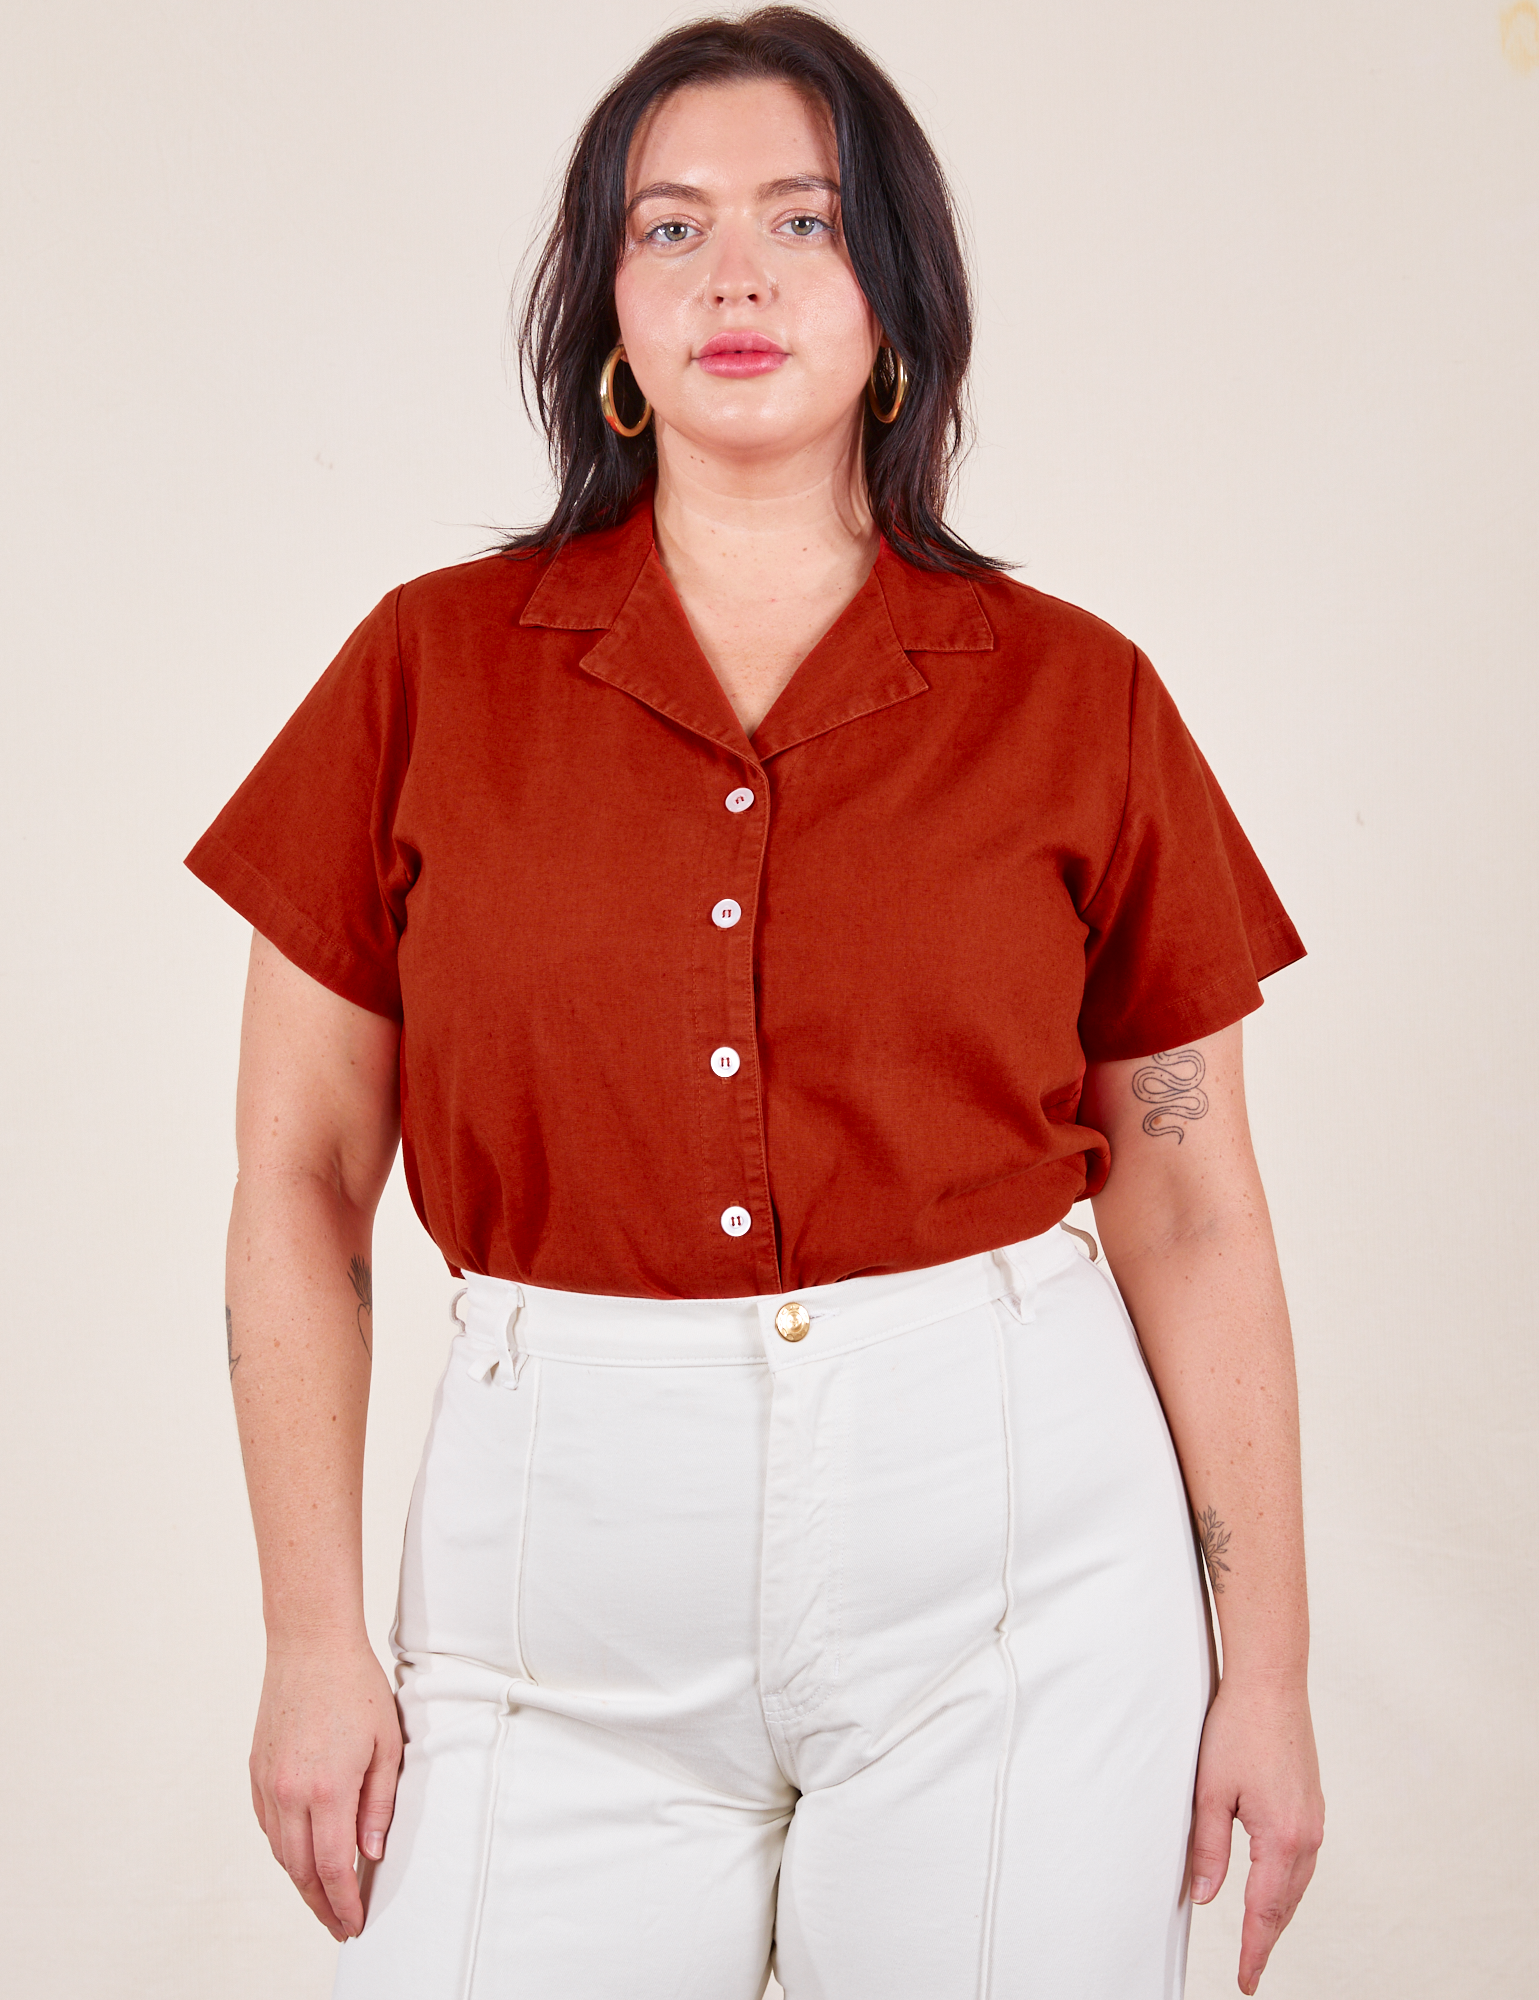 Faye is wearing Pantry Button-Up in Paprika tucked into vintage off-white Western Pants